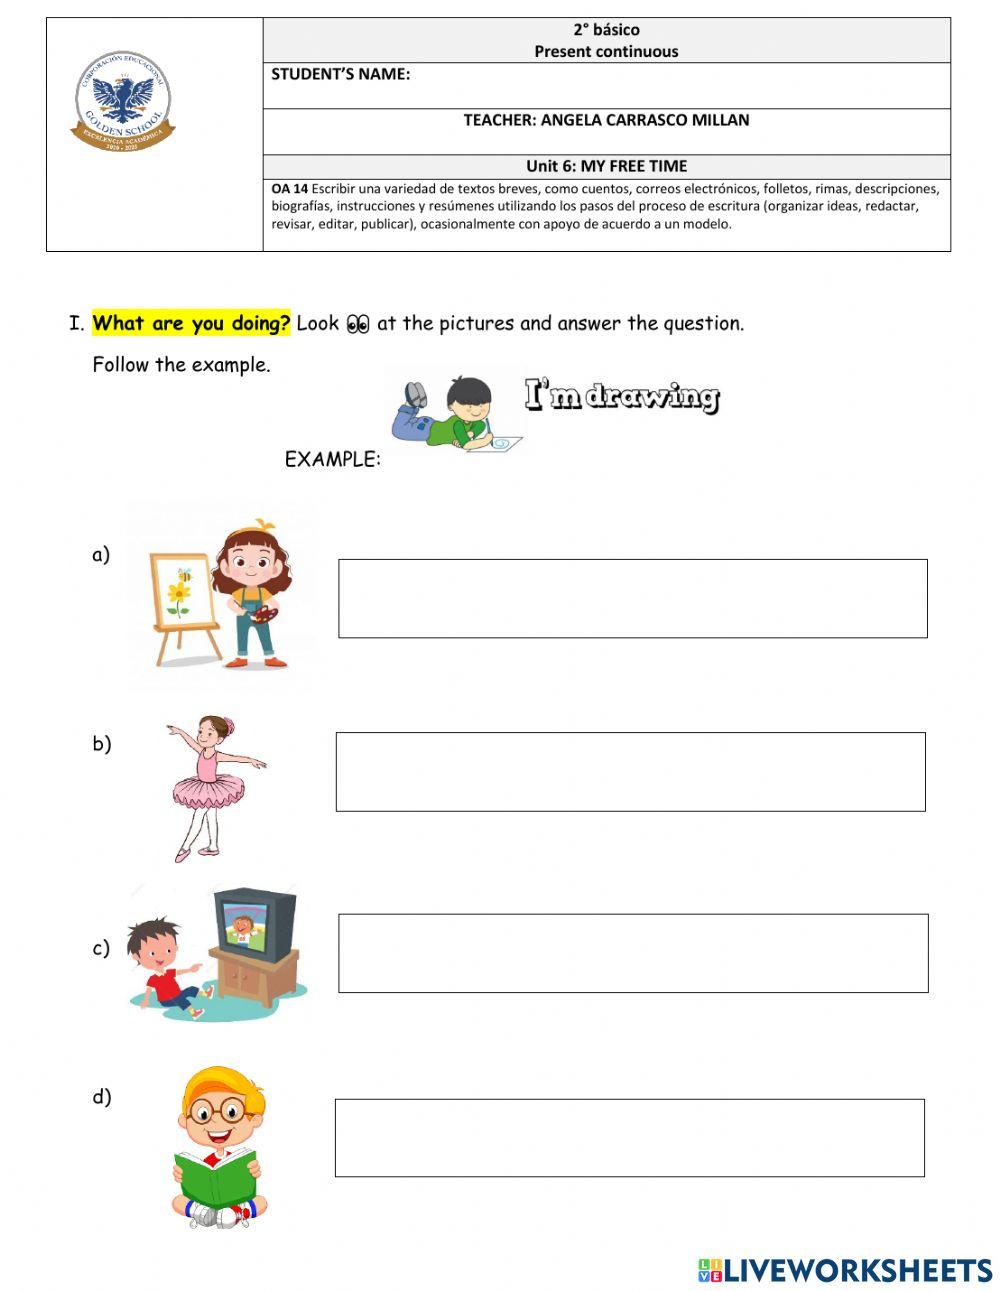 what are you doing now? - ESL worksheet by Adva